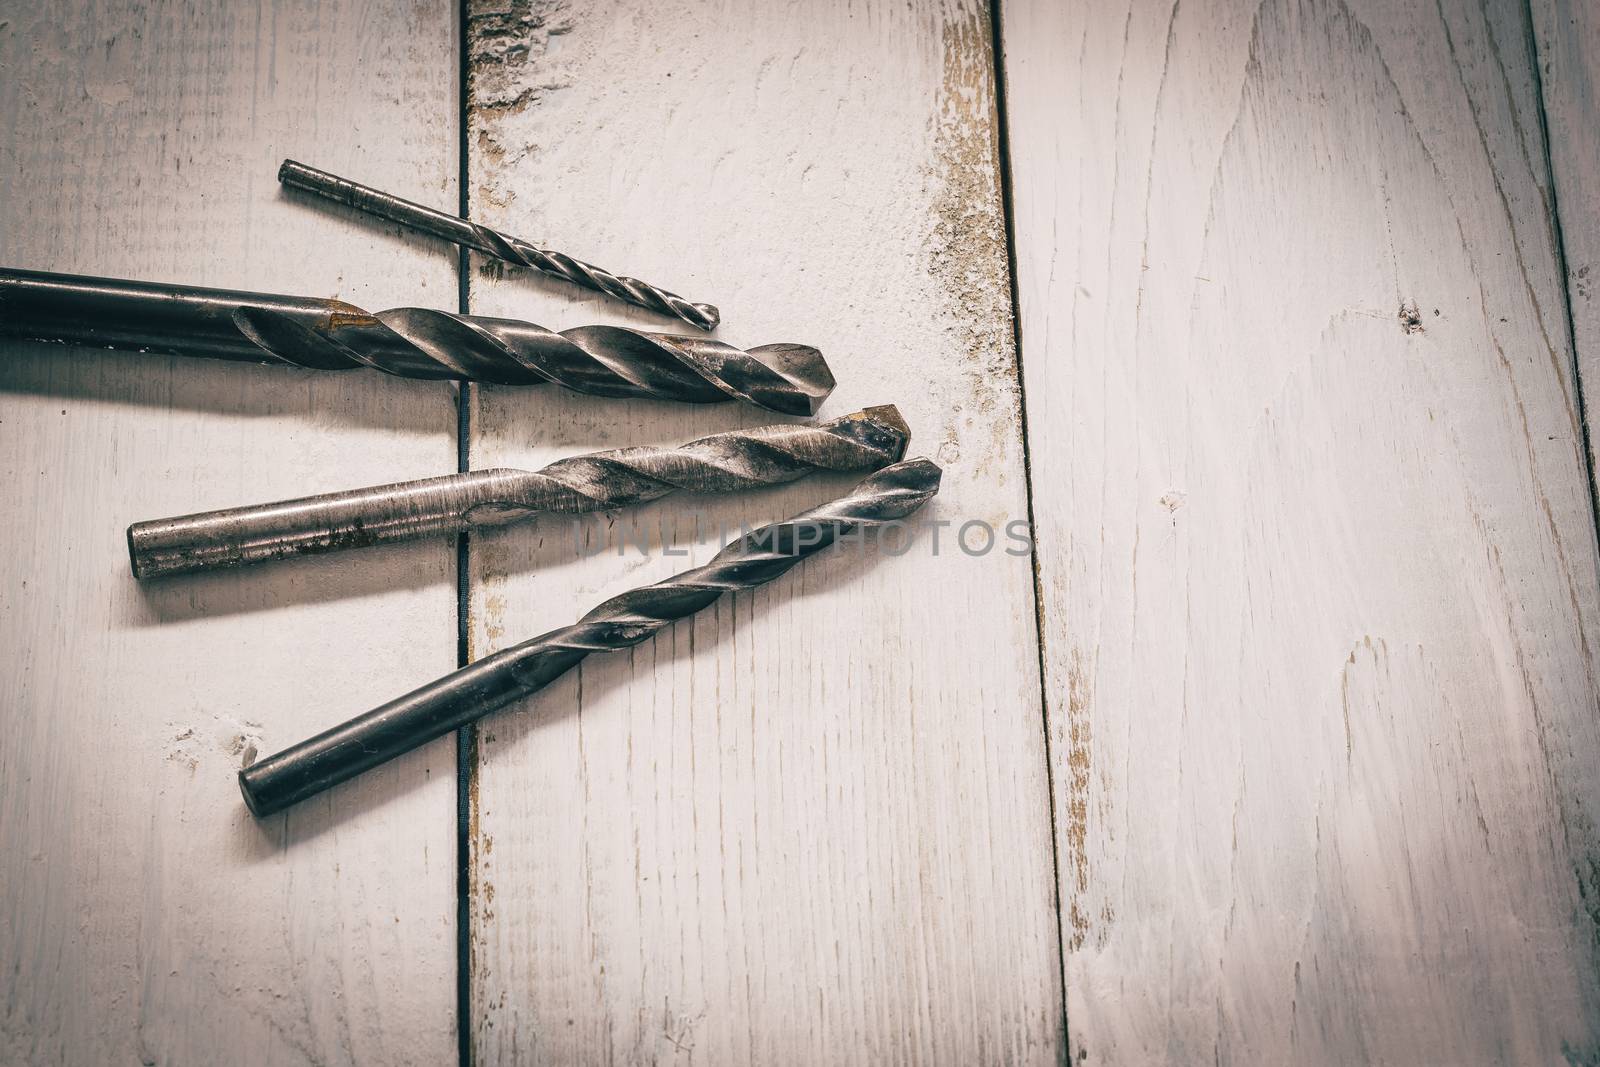 Group of  old oxide old tools. by nachrc2001